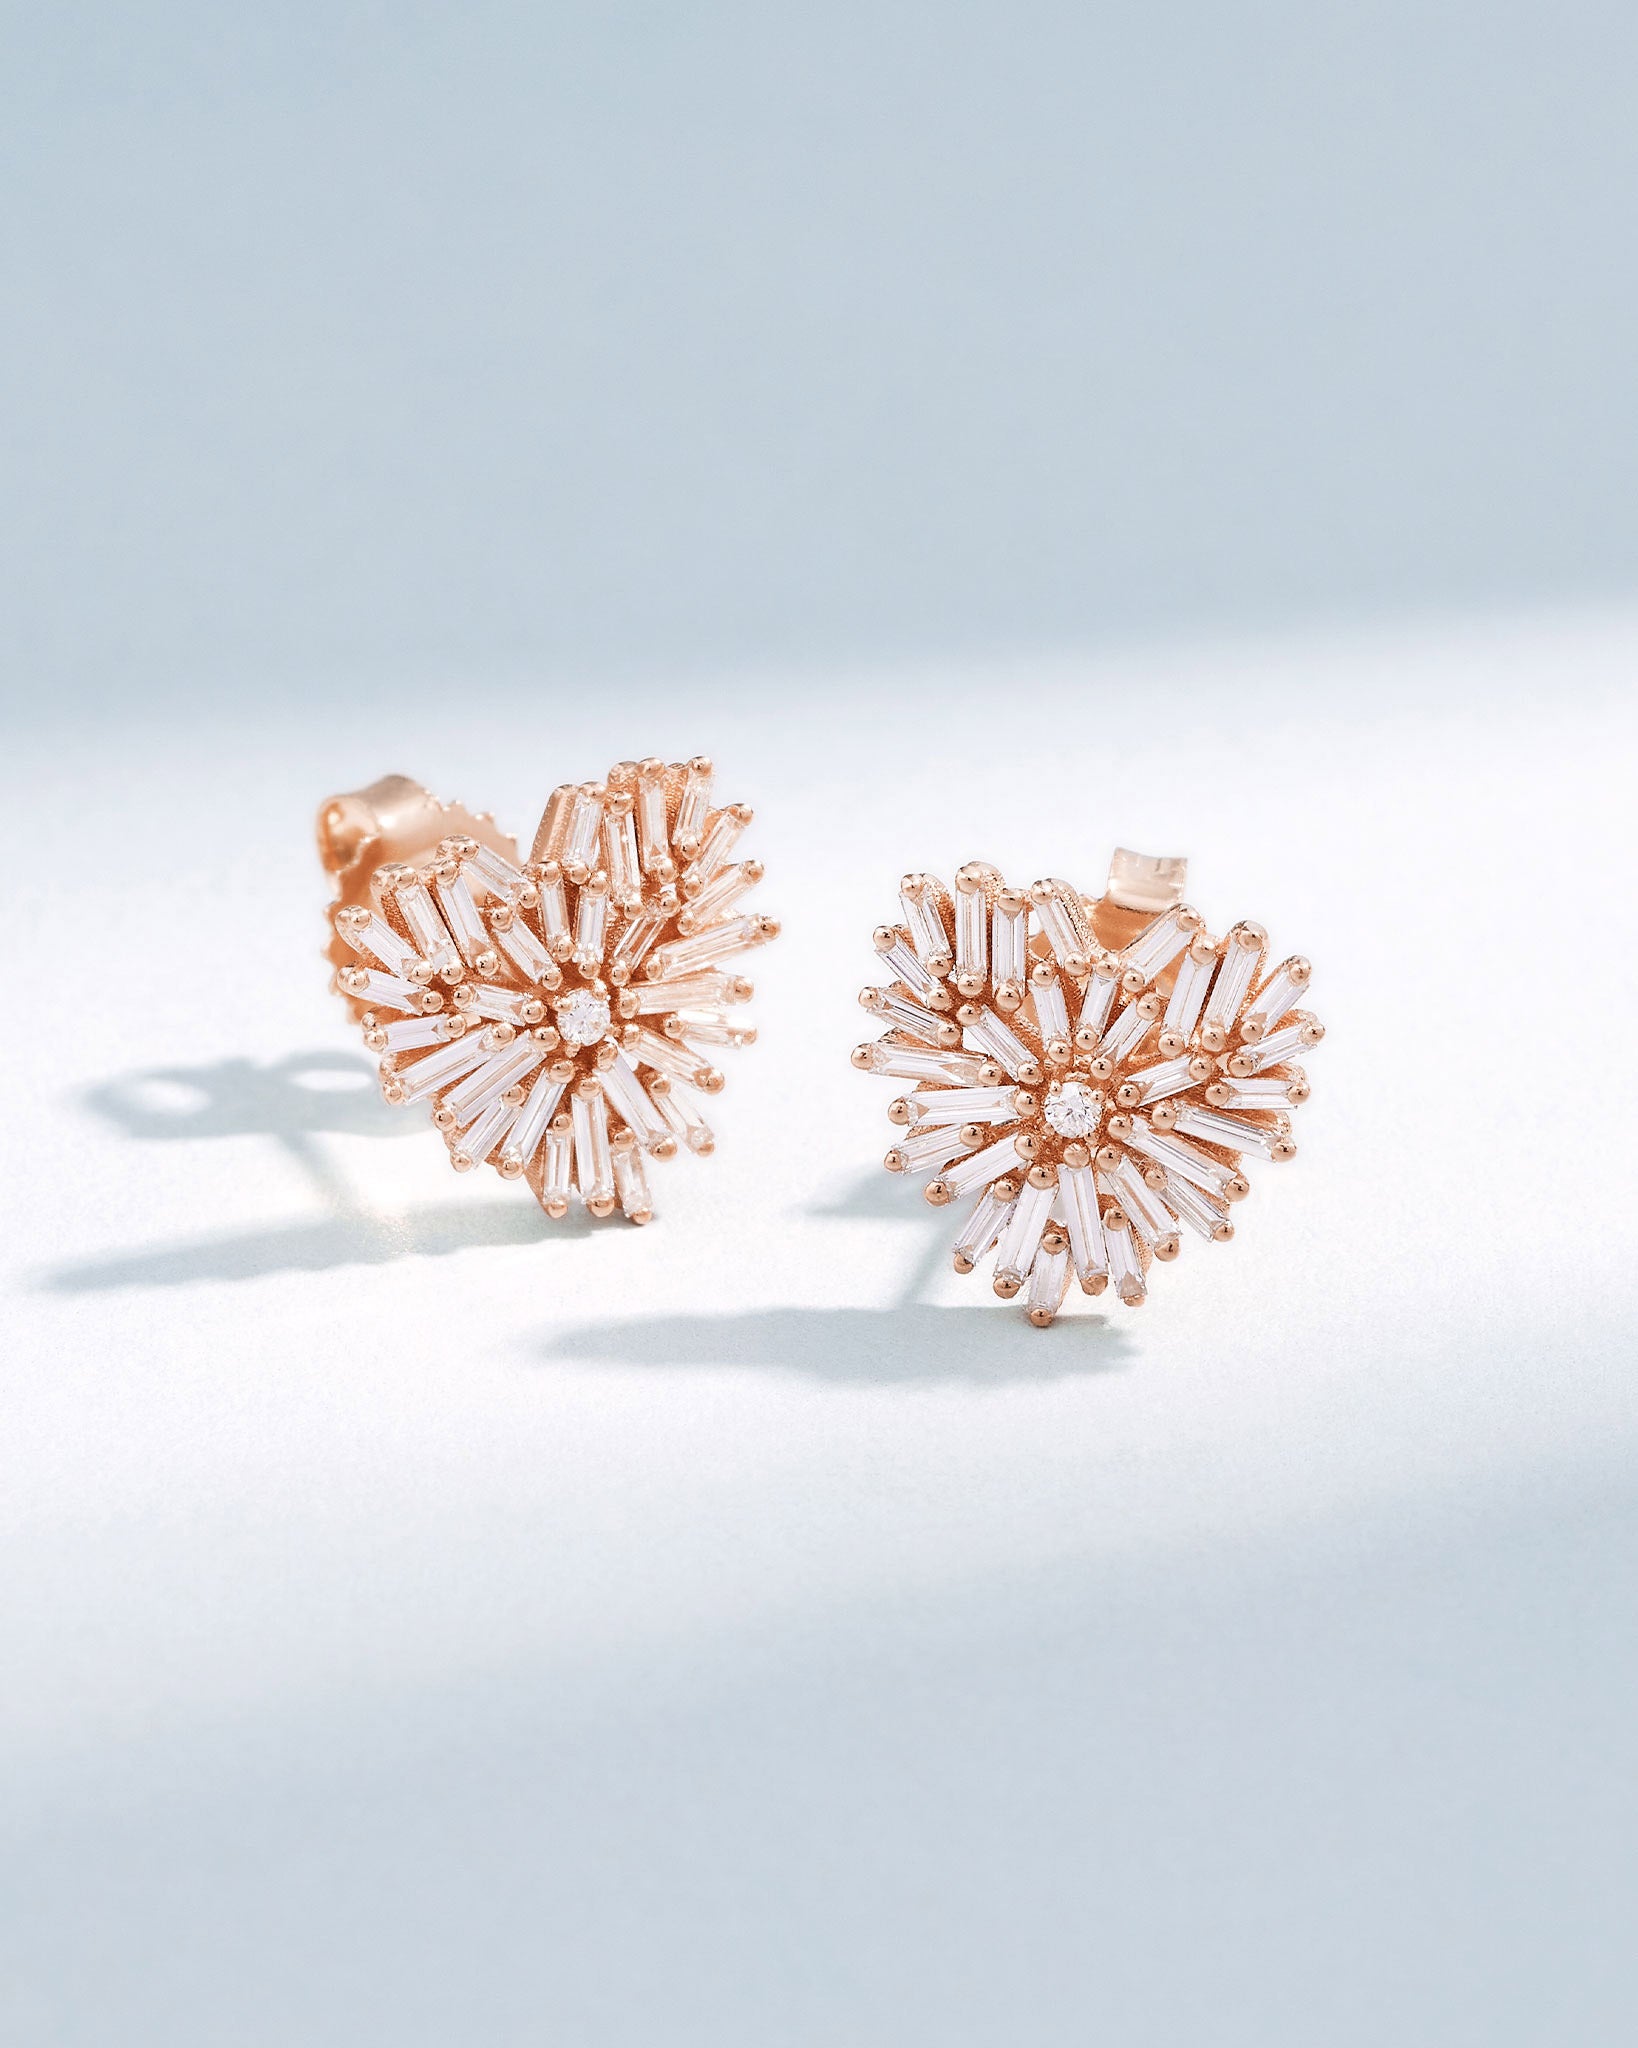 Suzanne Kalan Classic Diamond Small Heart Studs in 18k rose gold